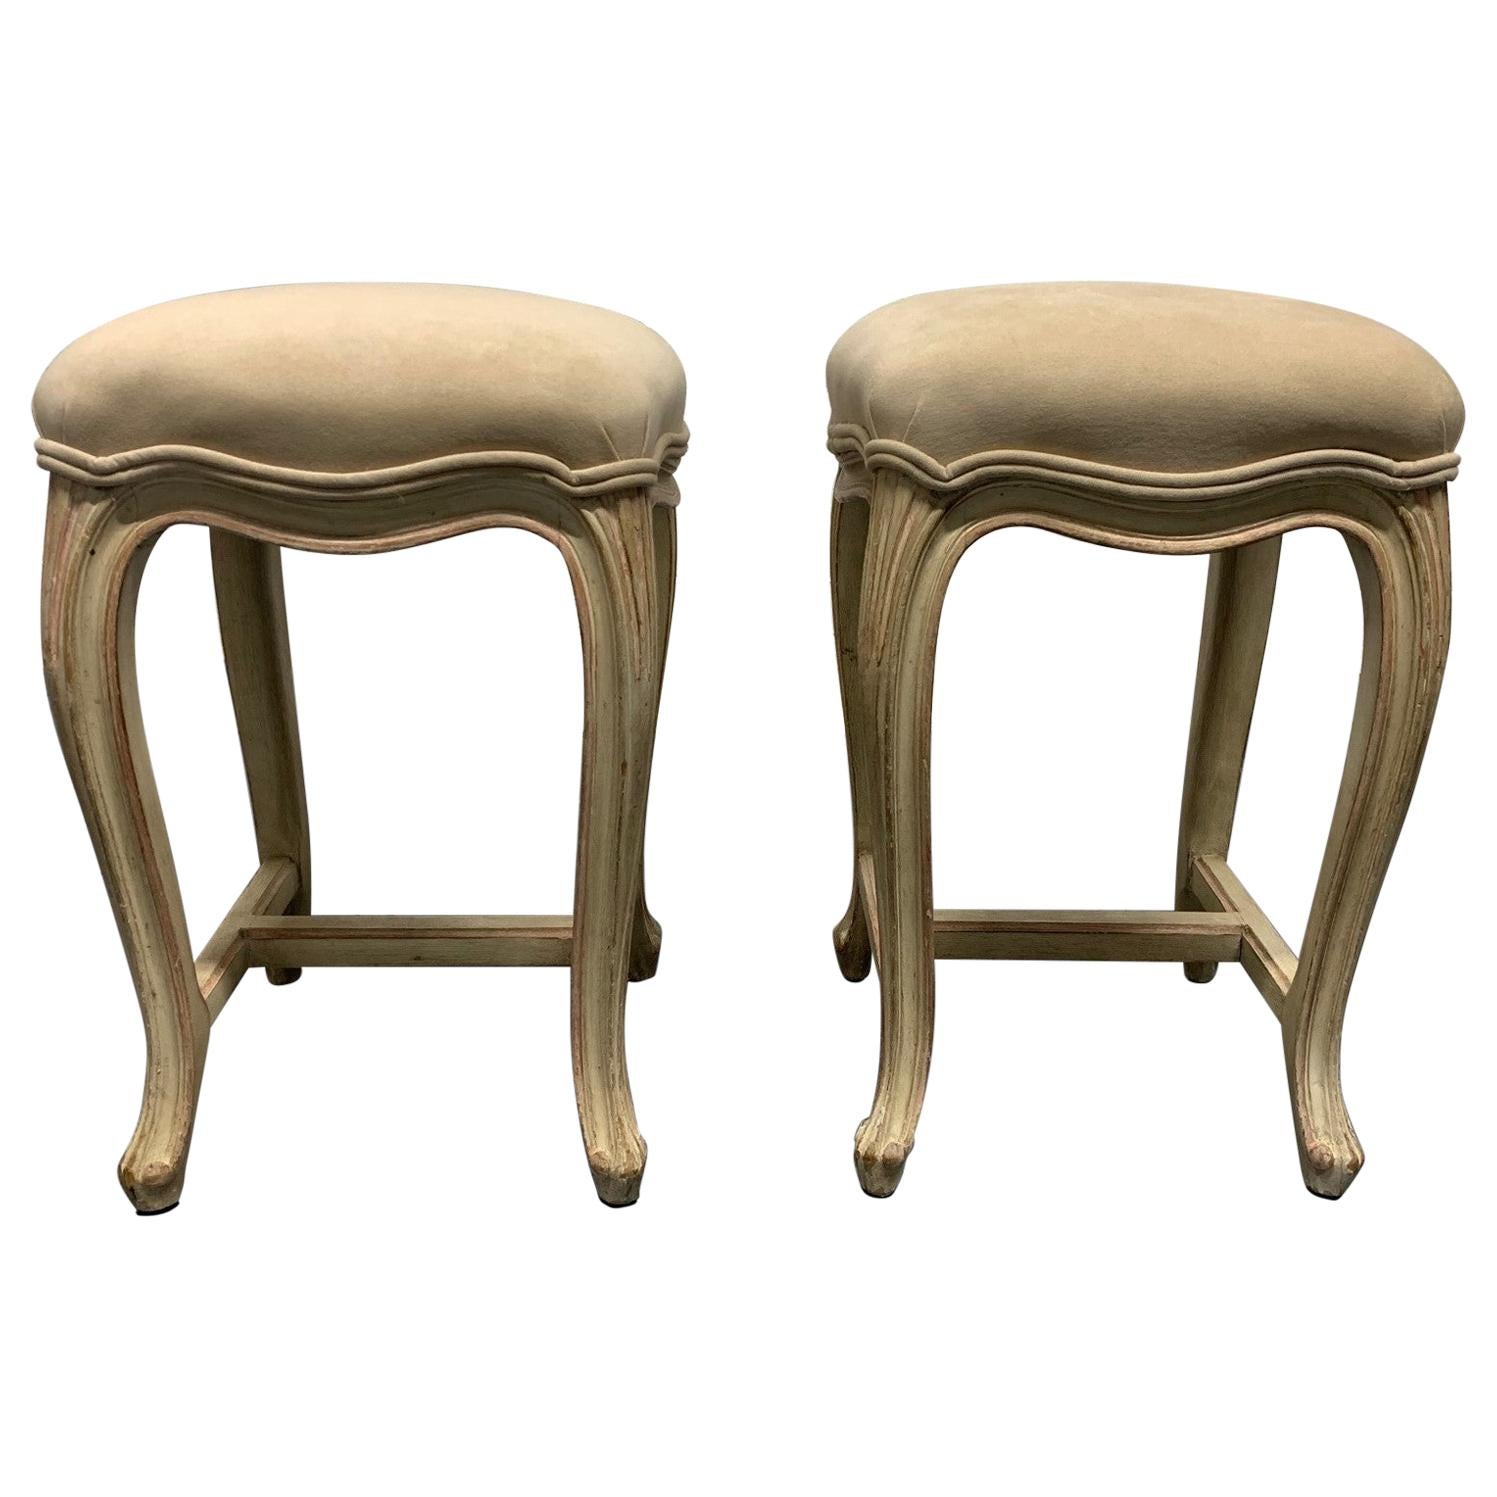 Pair of French Painted Upholstered Stools